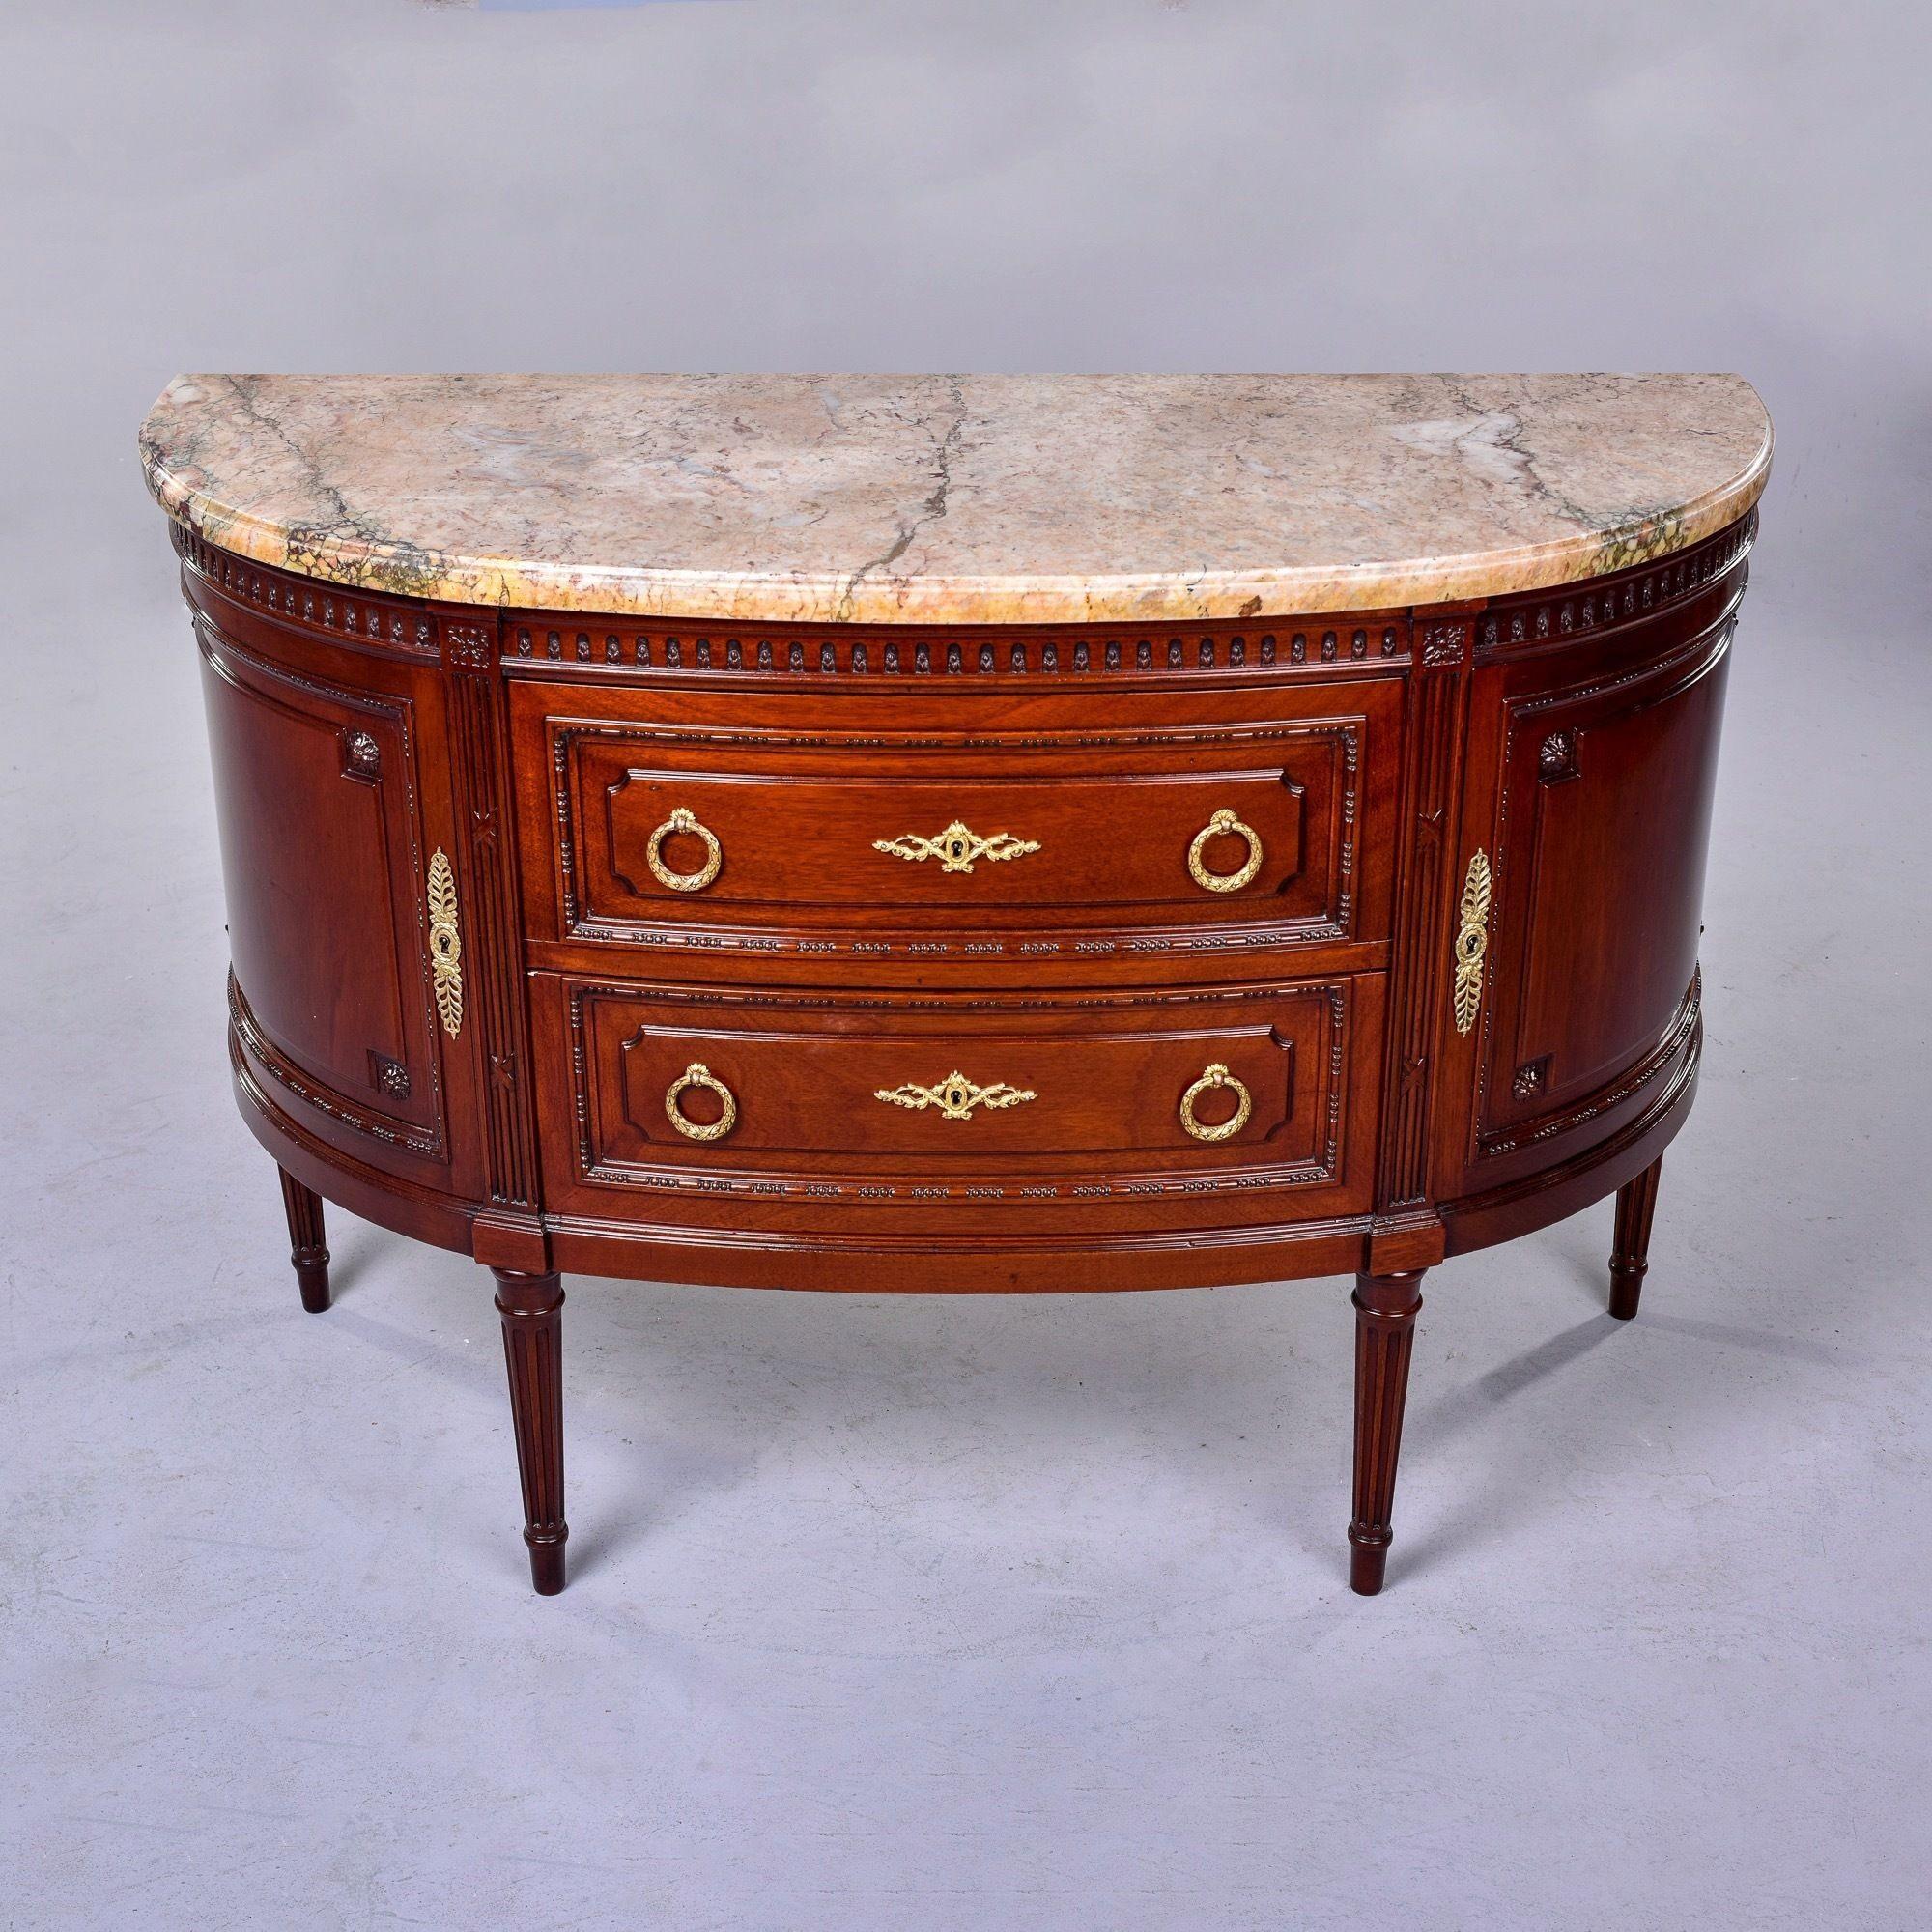 Found in France, this circa 1910 empire style demi lune commode is made of mahogany with a marble top. Commode has two locking drawers flanked by wedge-shaped, locking side cabinets. Four reeded and tapered legs, decorative carved details, brass